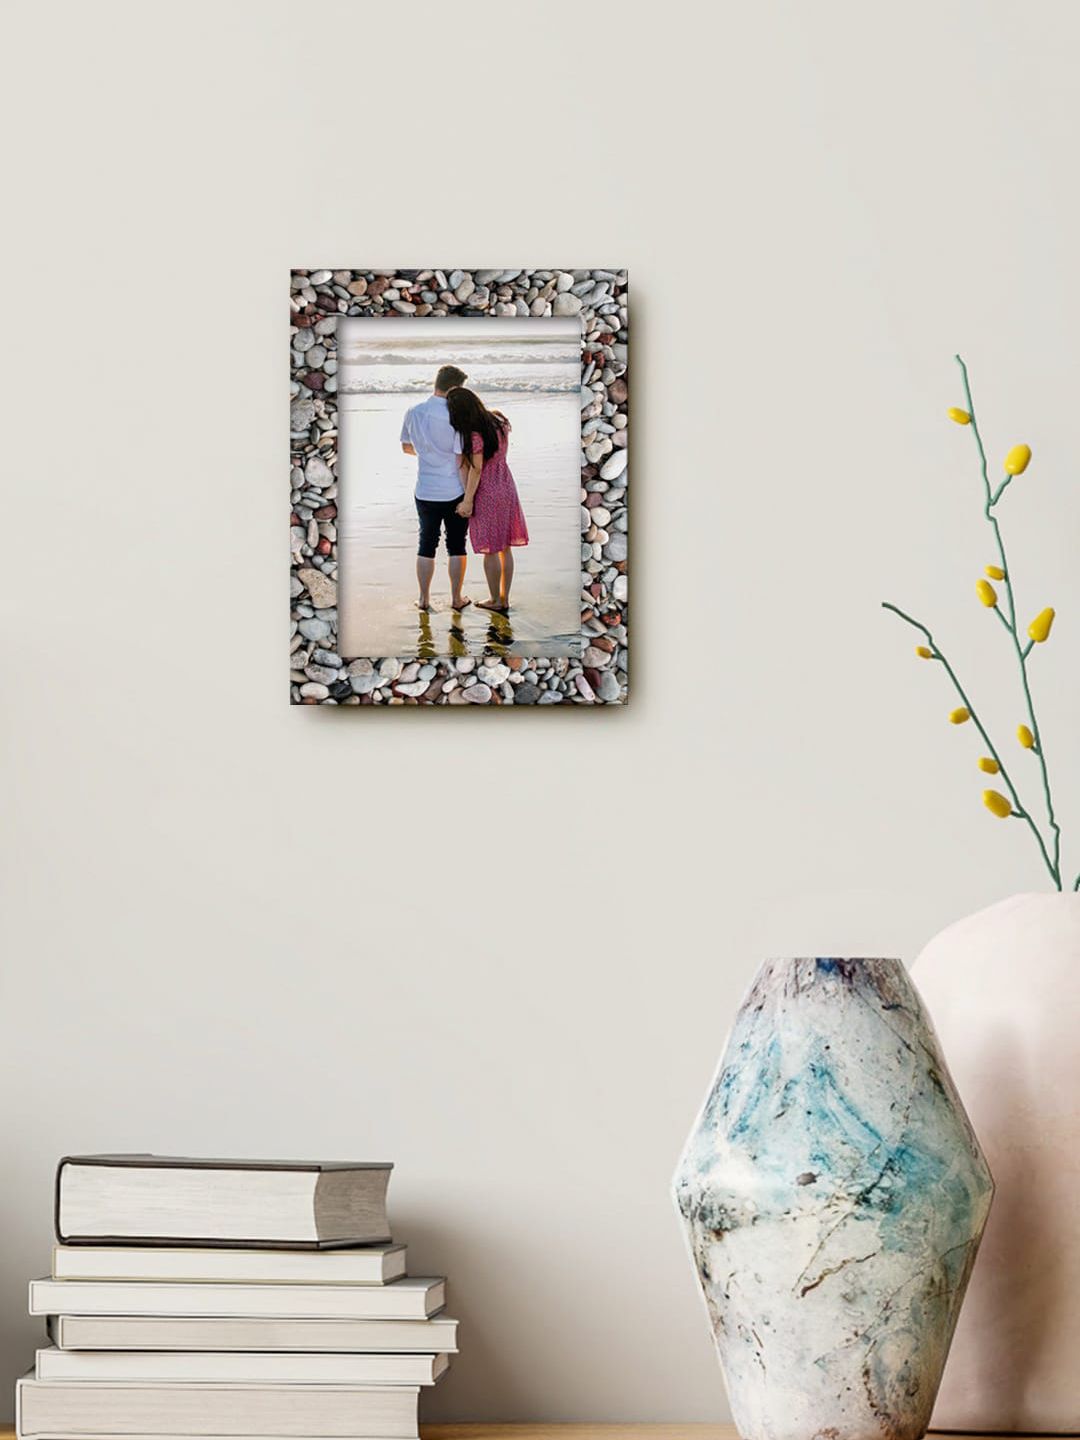 999Store Brown & White Printed Wall Photo Frame Price in India